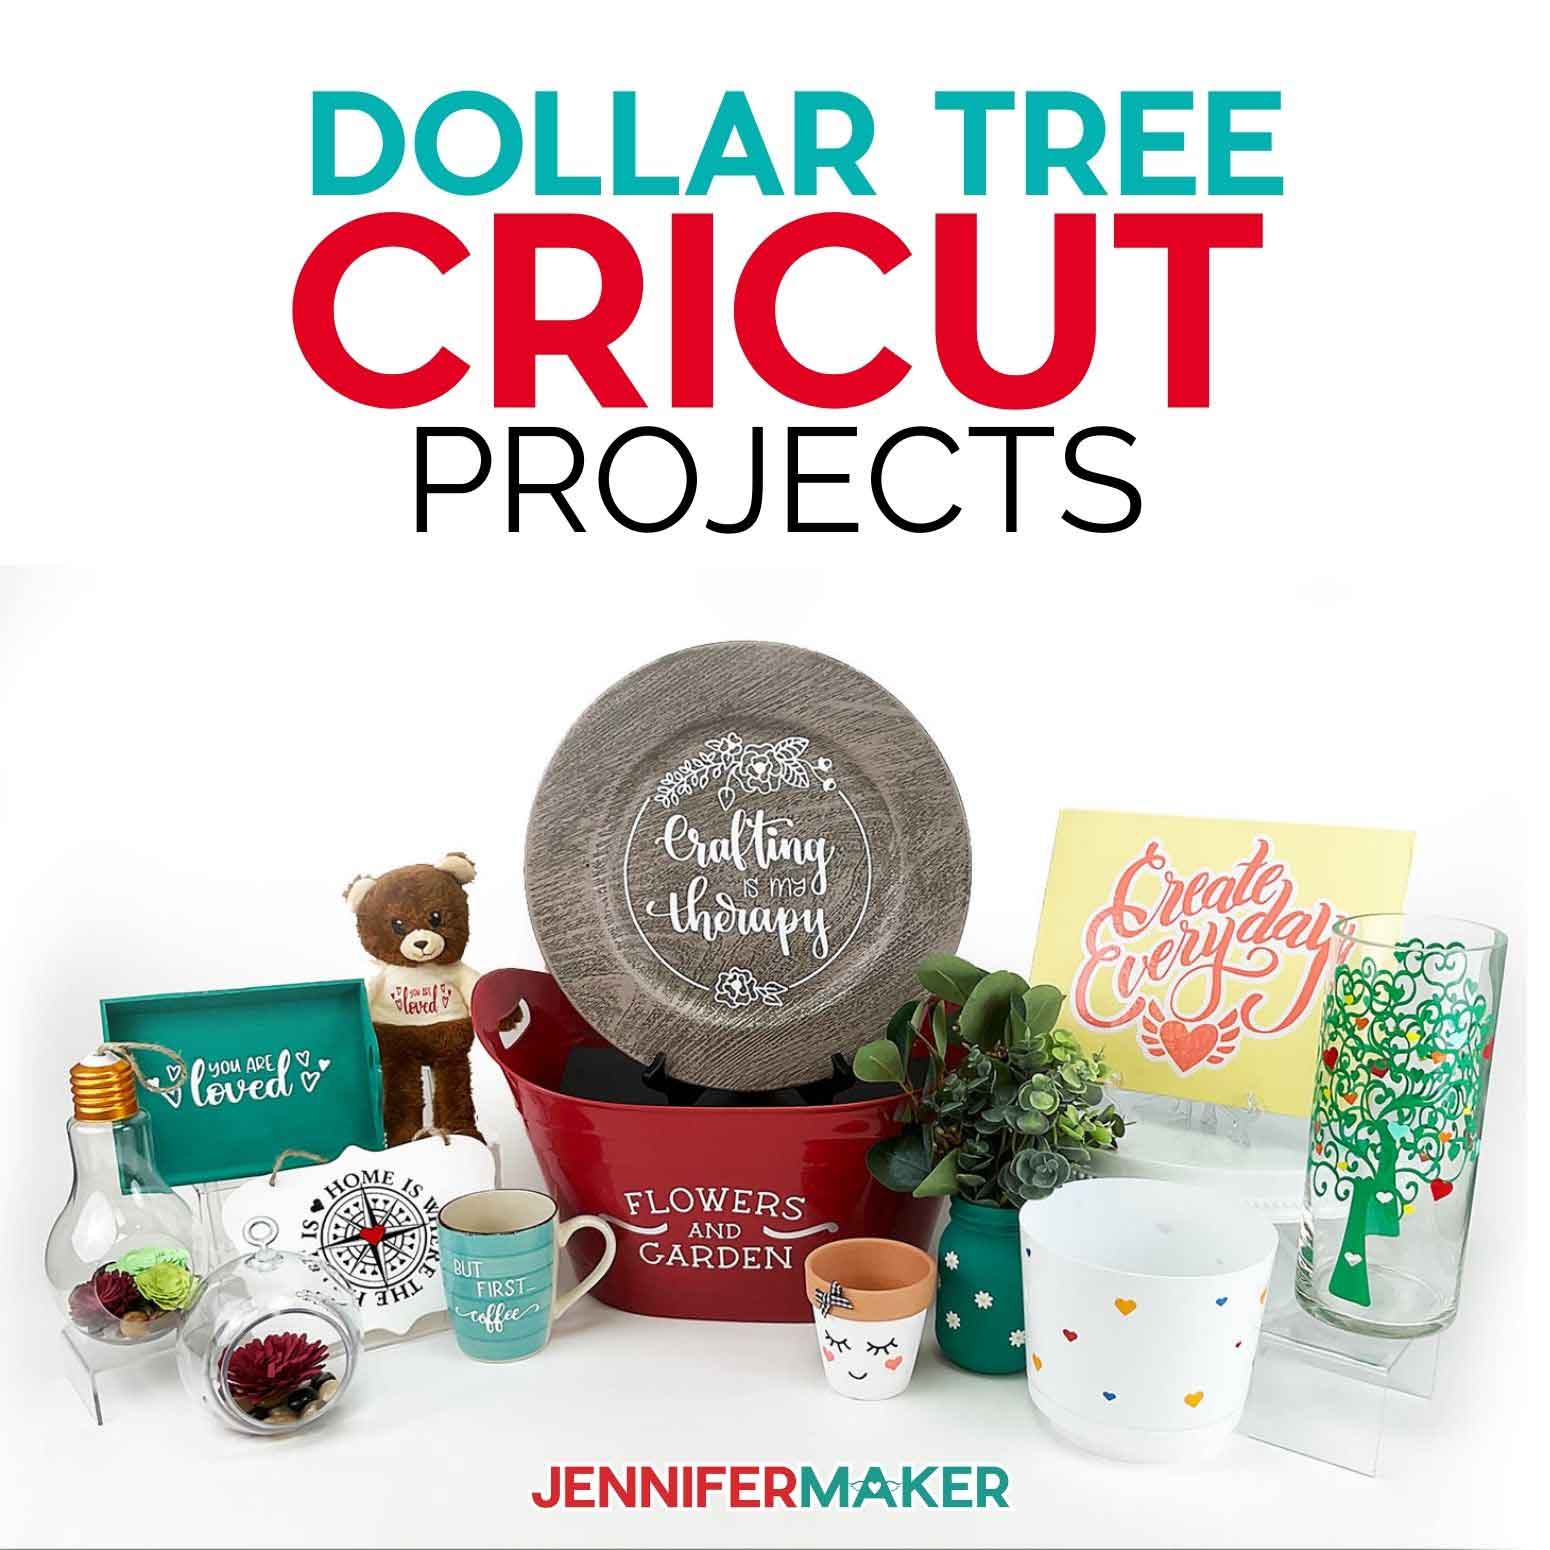 Dollar Tree Cricut Projects – 12 Designs, Hundreds of Options!